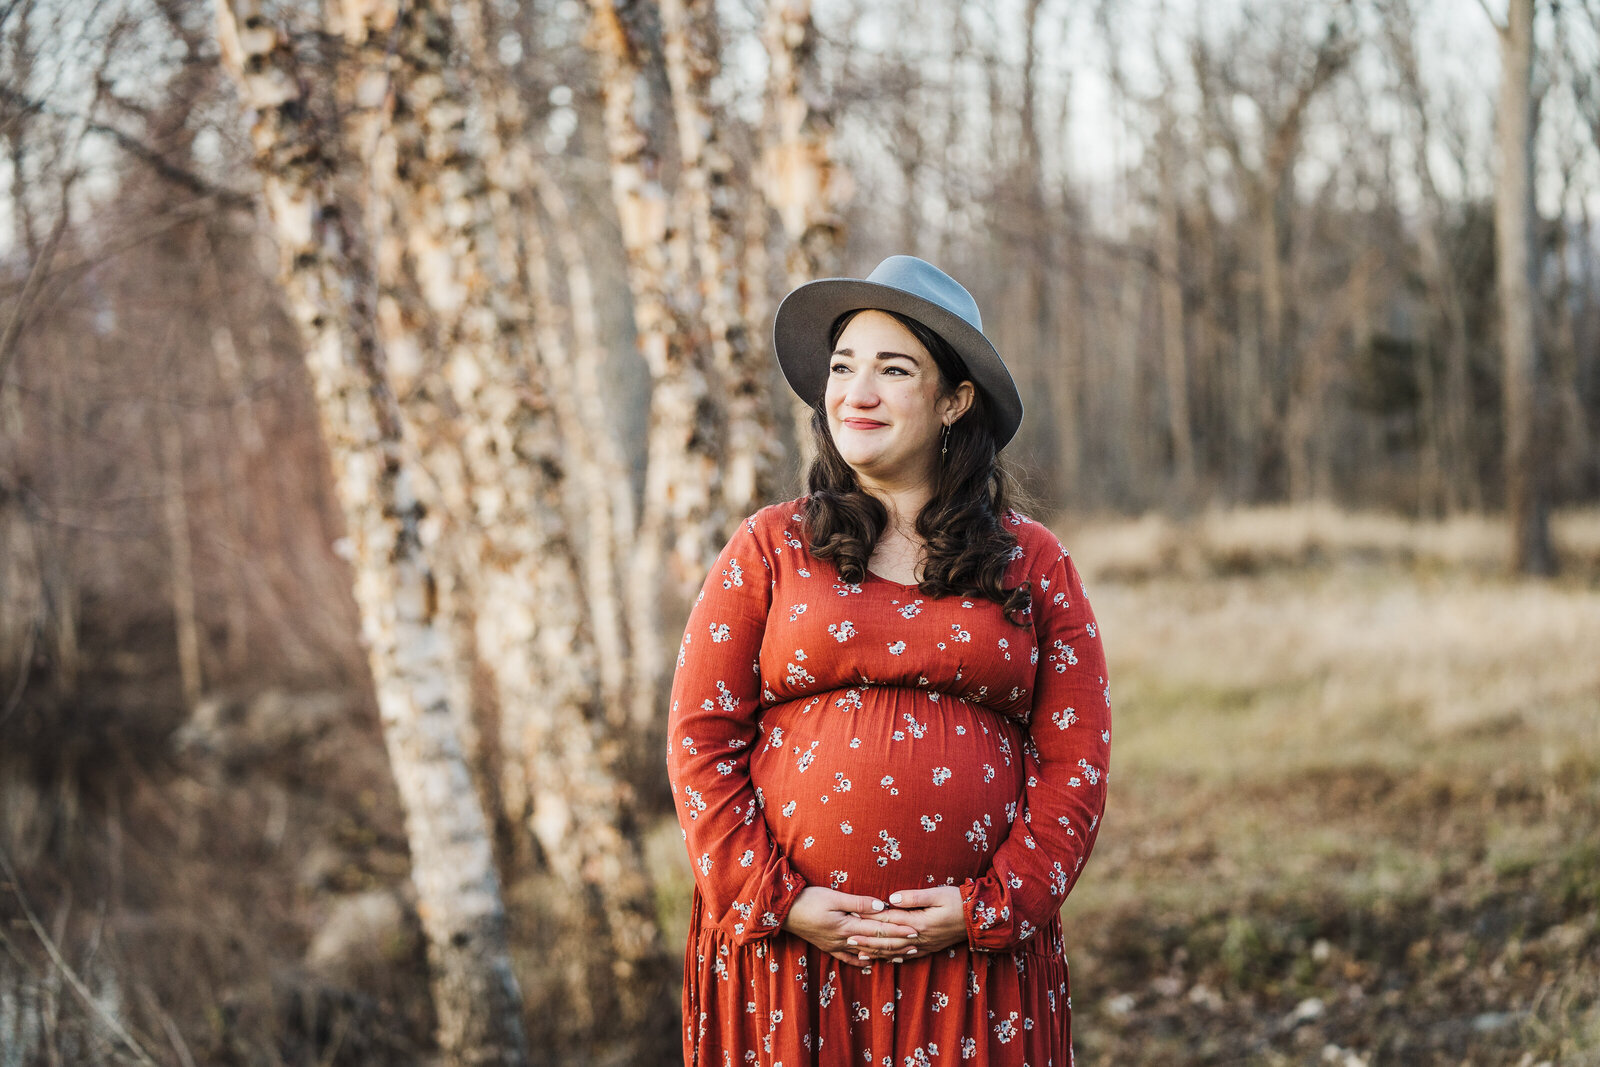 pregnant woman in red dress stands in front of birch trees